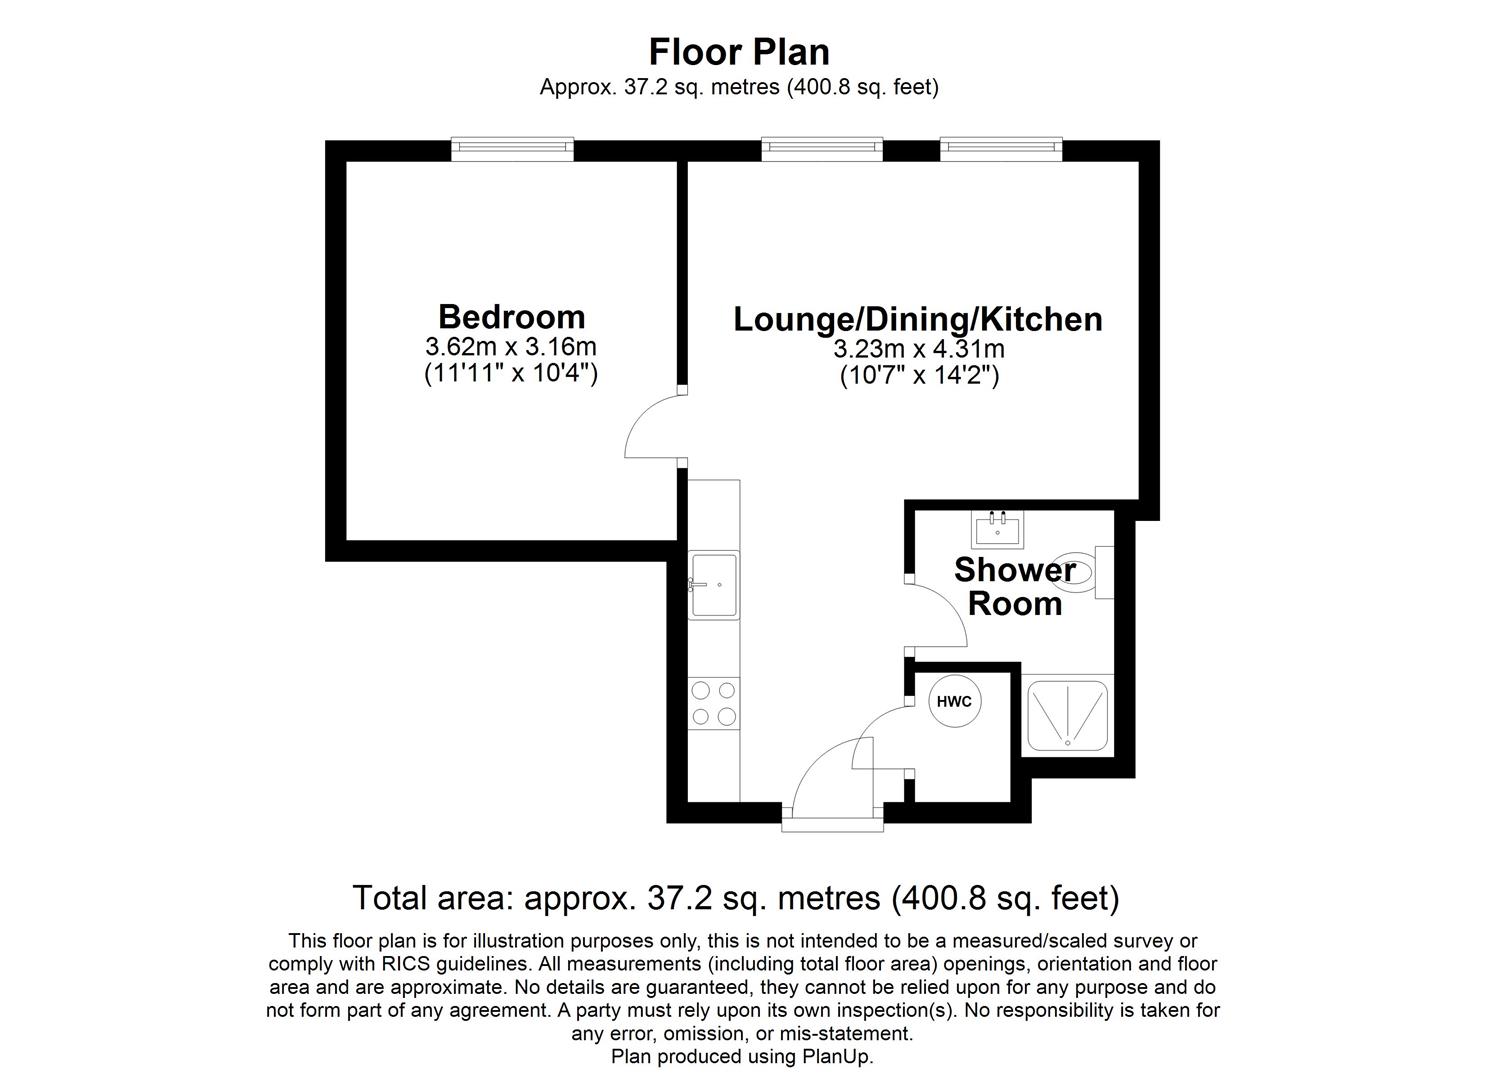 1 bed apartment to rent in Warwick Road, Solihull - Property floorplan